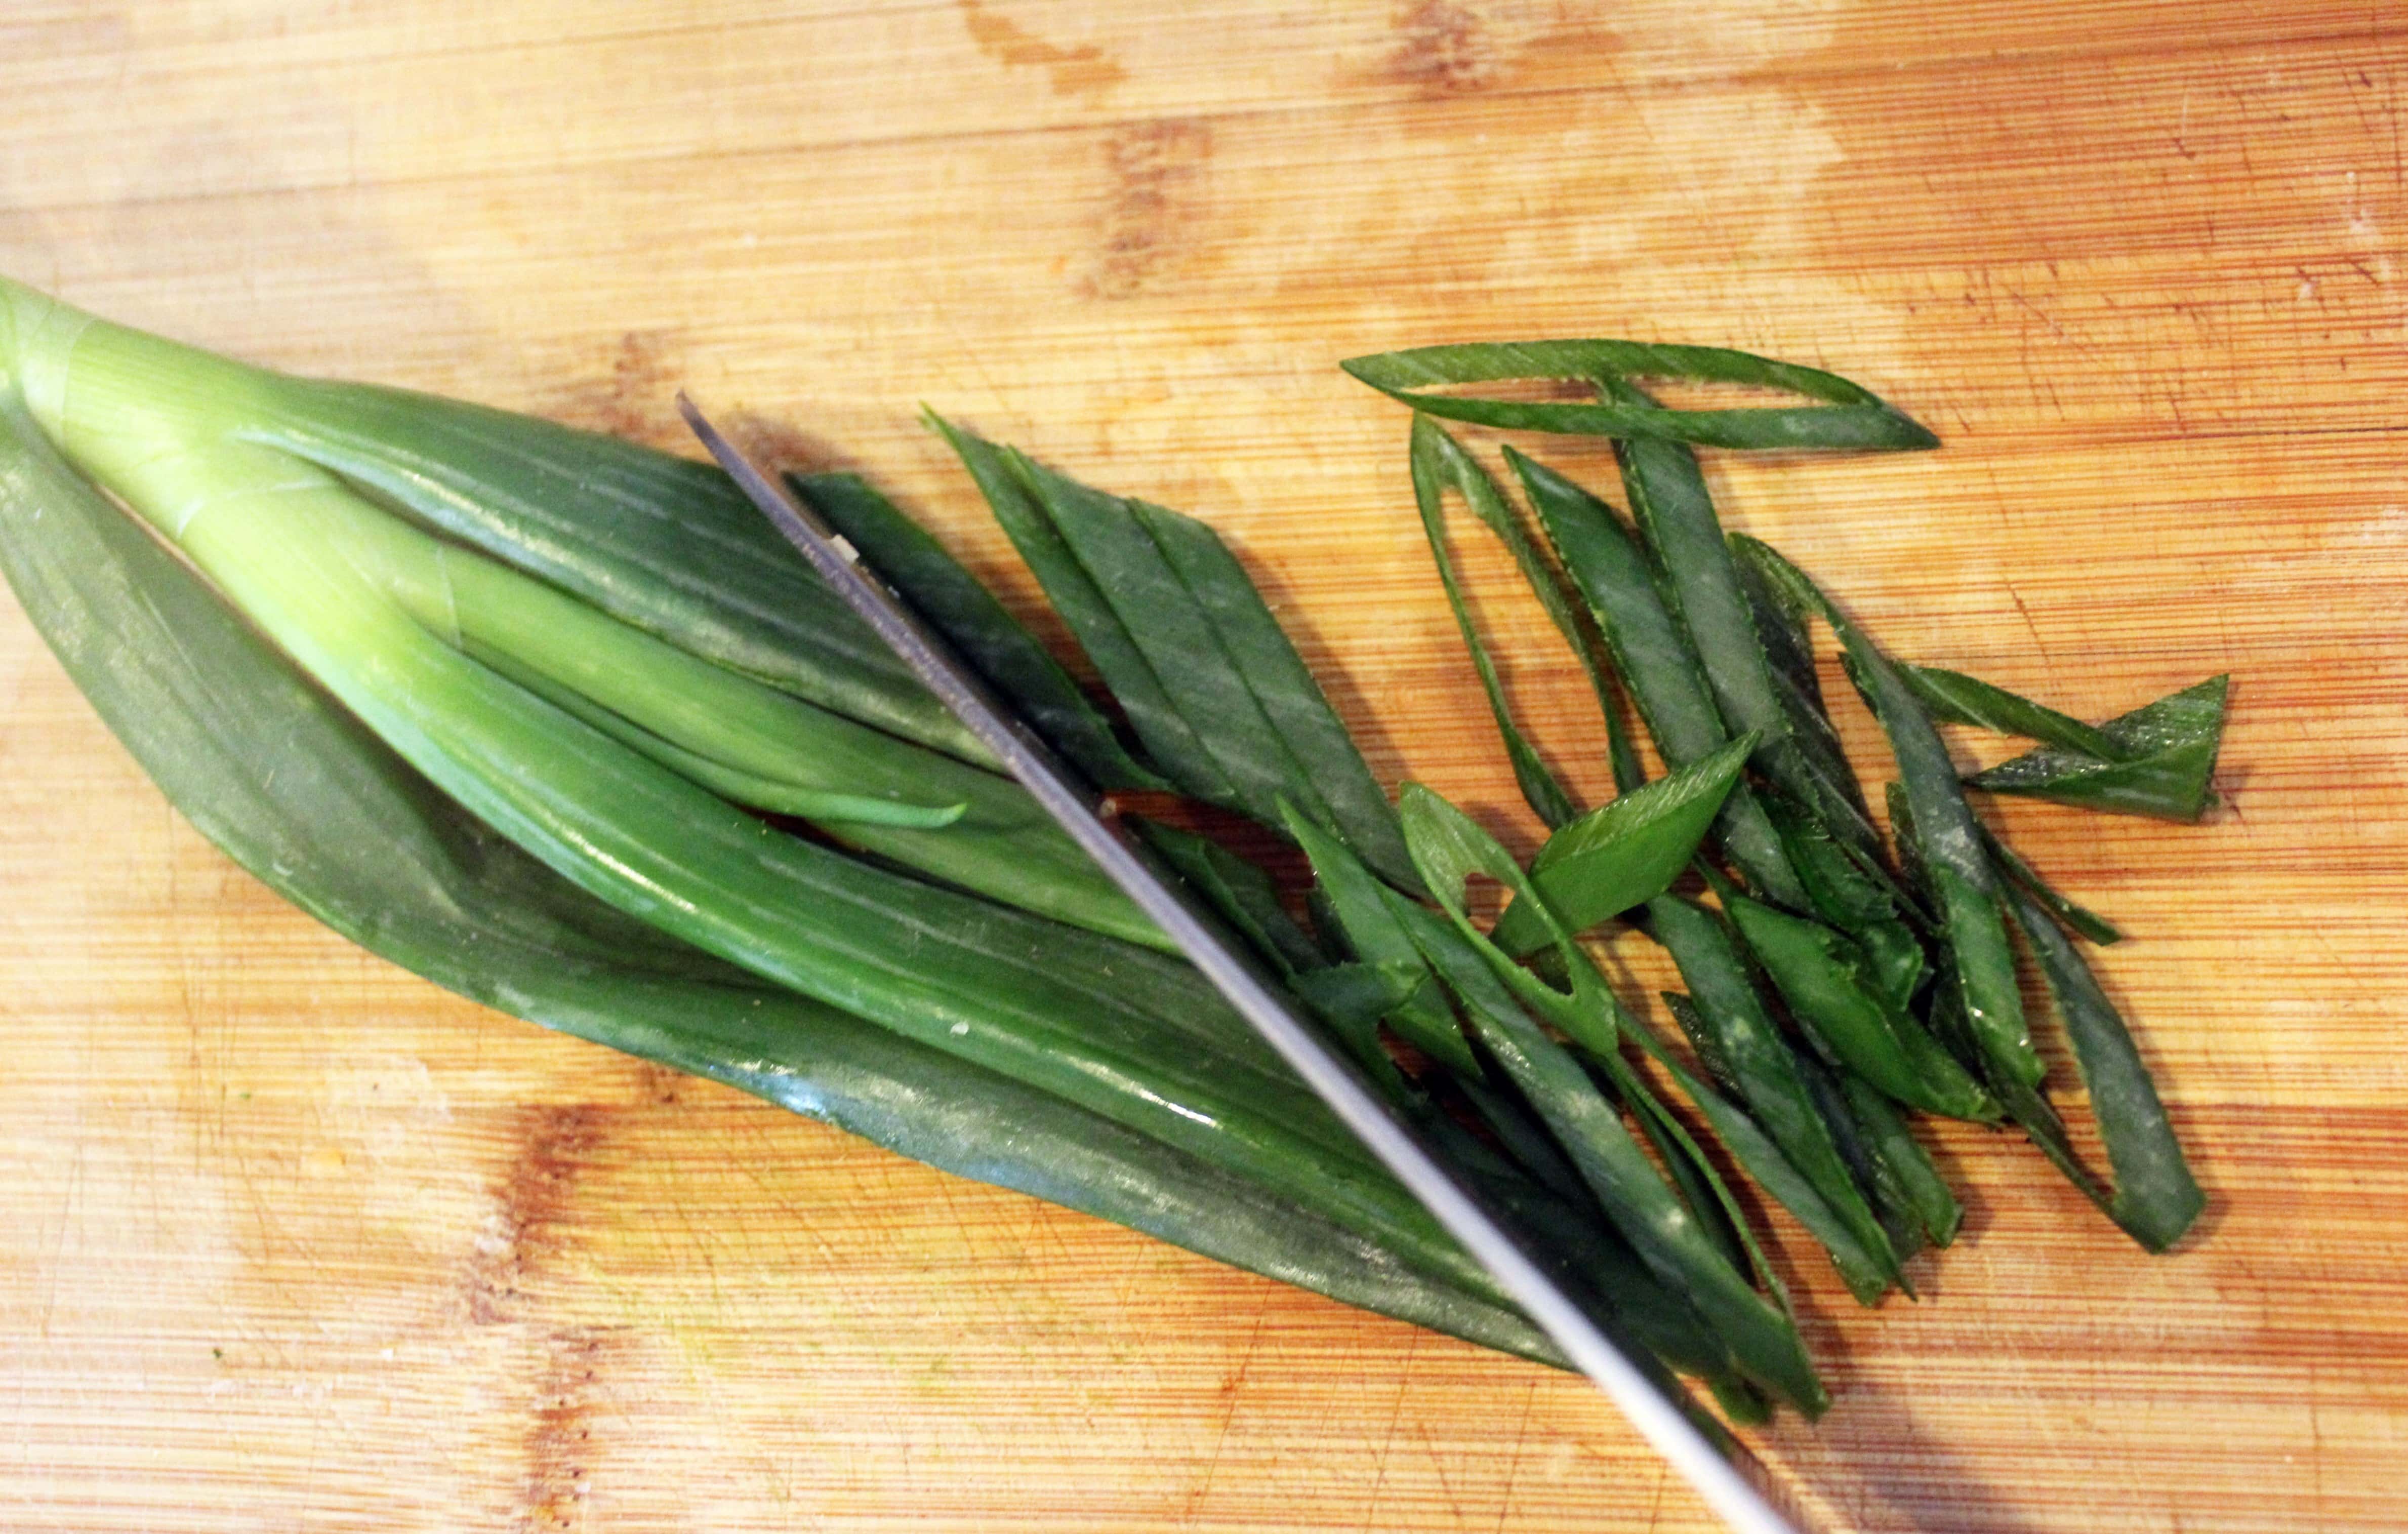 Thinly slice scallions on an angle